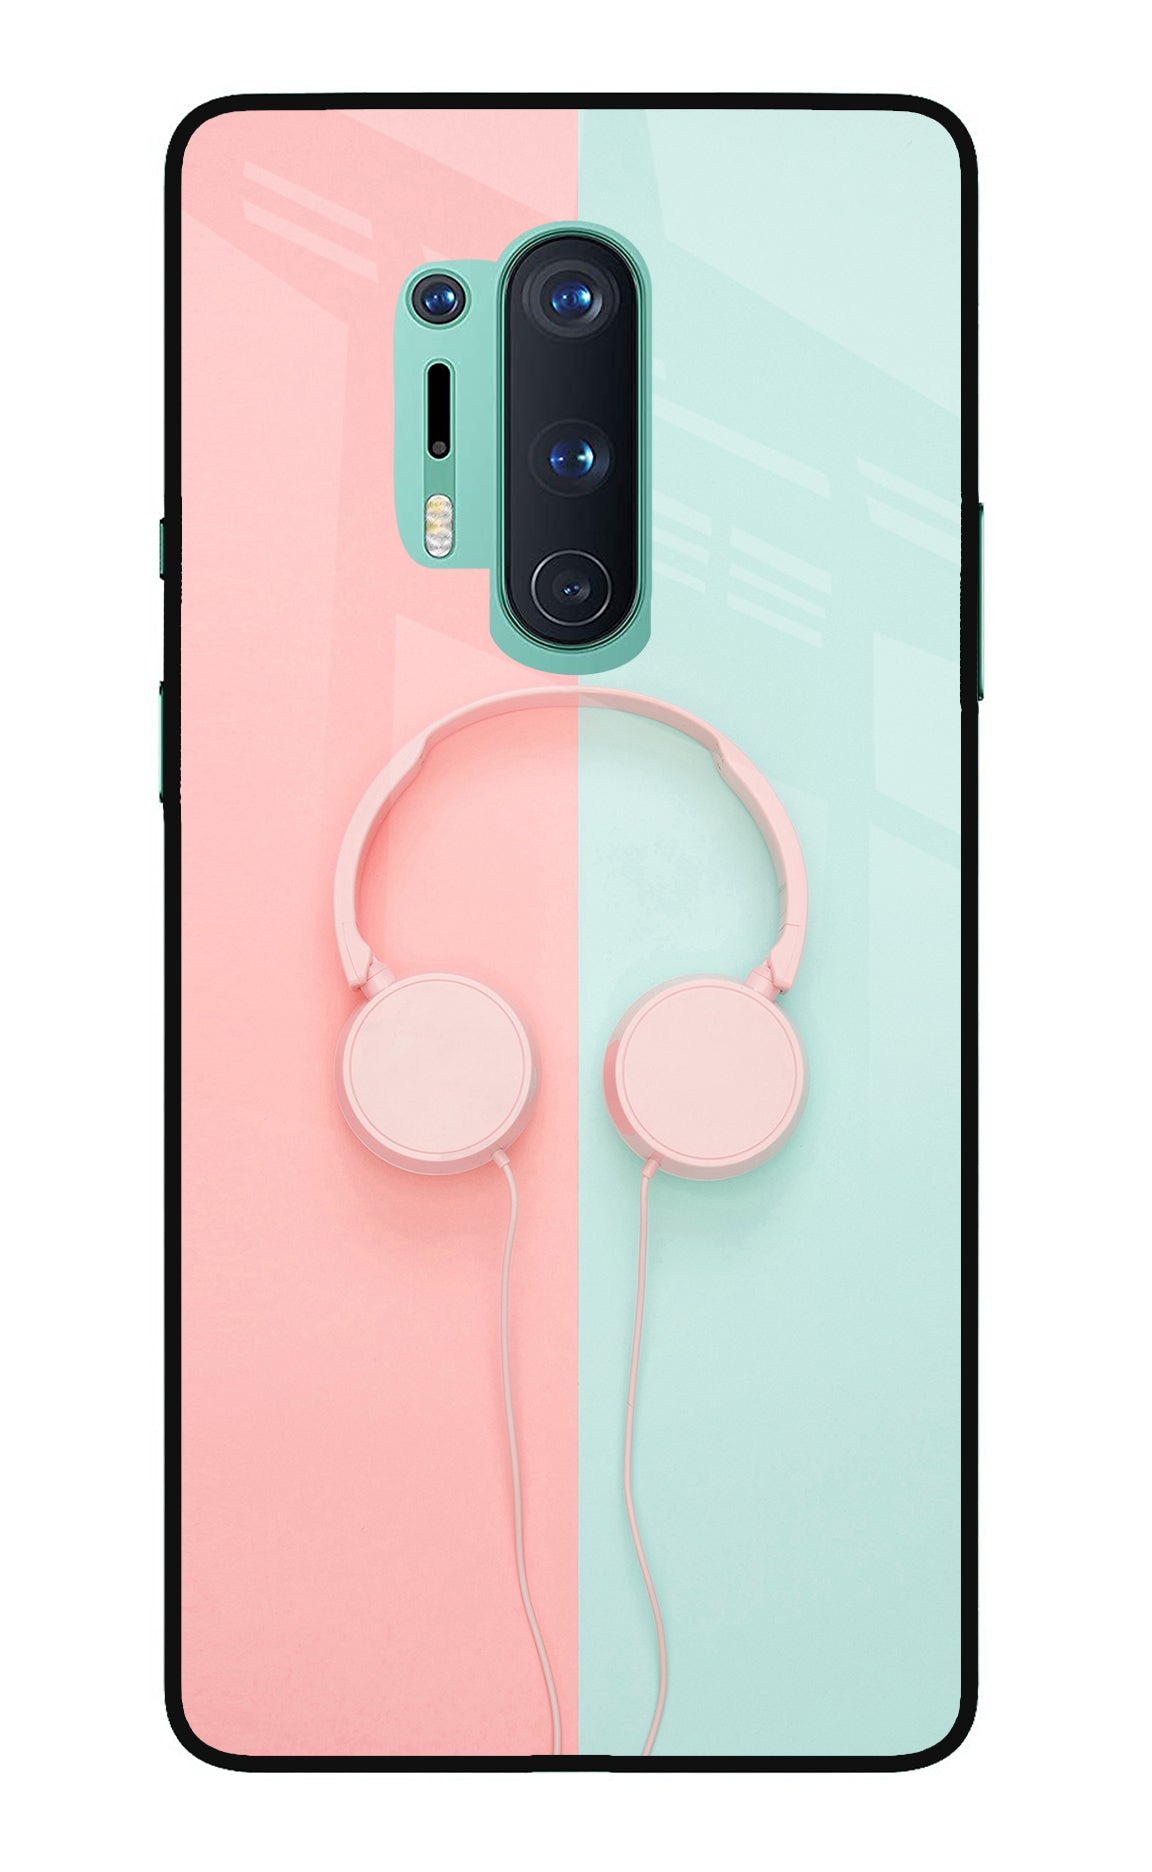 Music Lover Oneplus 8 Pro Back Cover